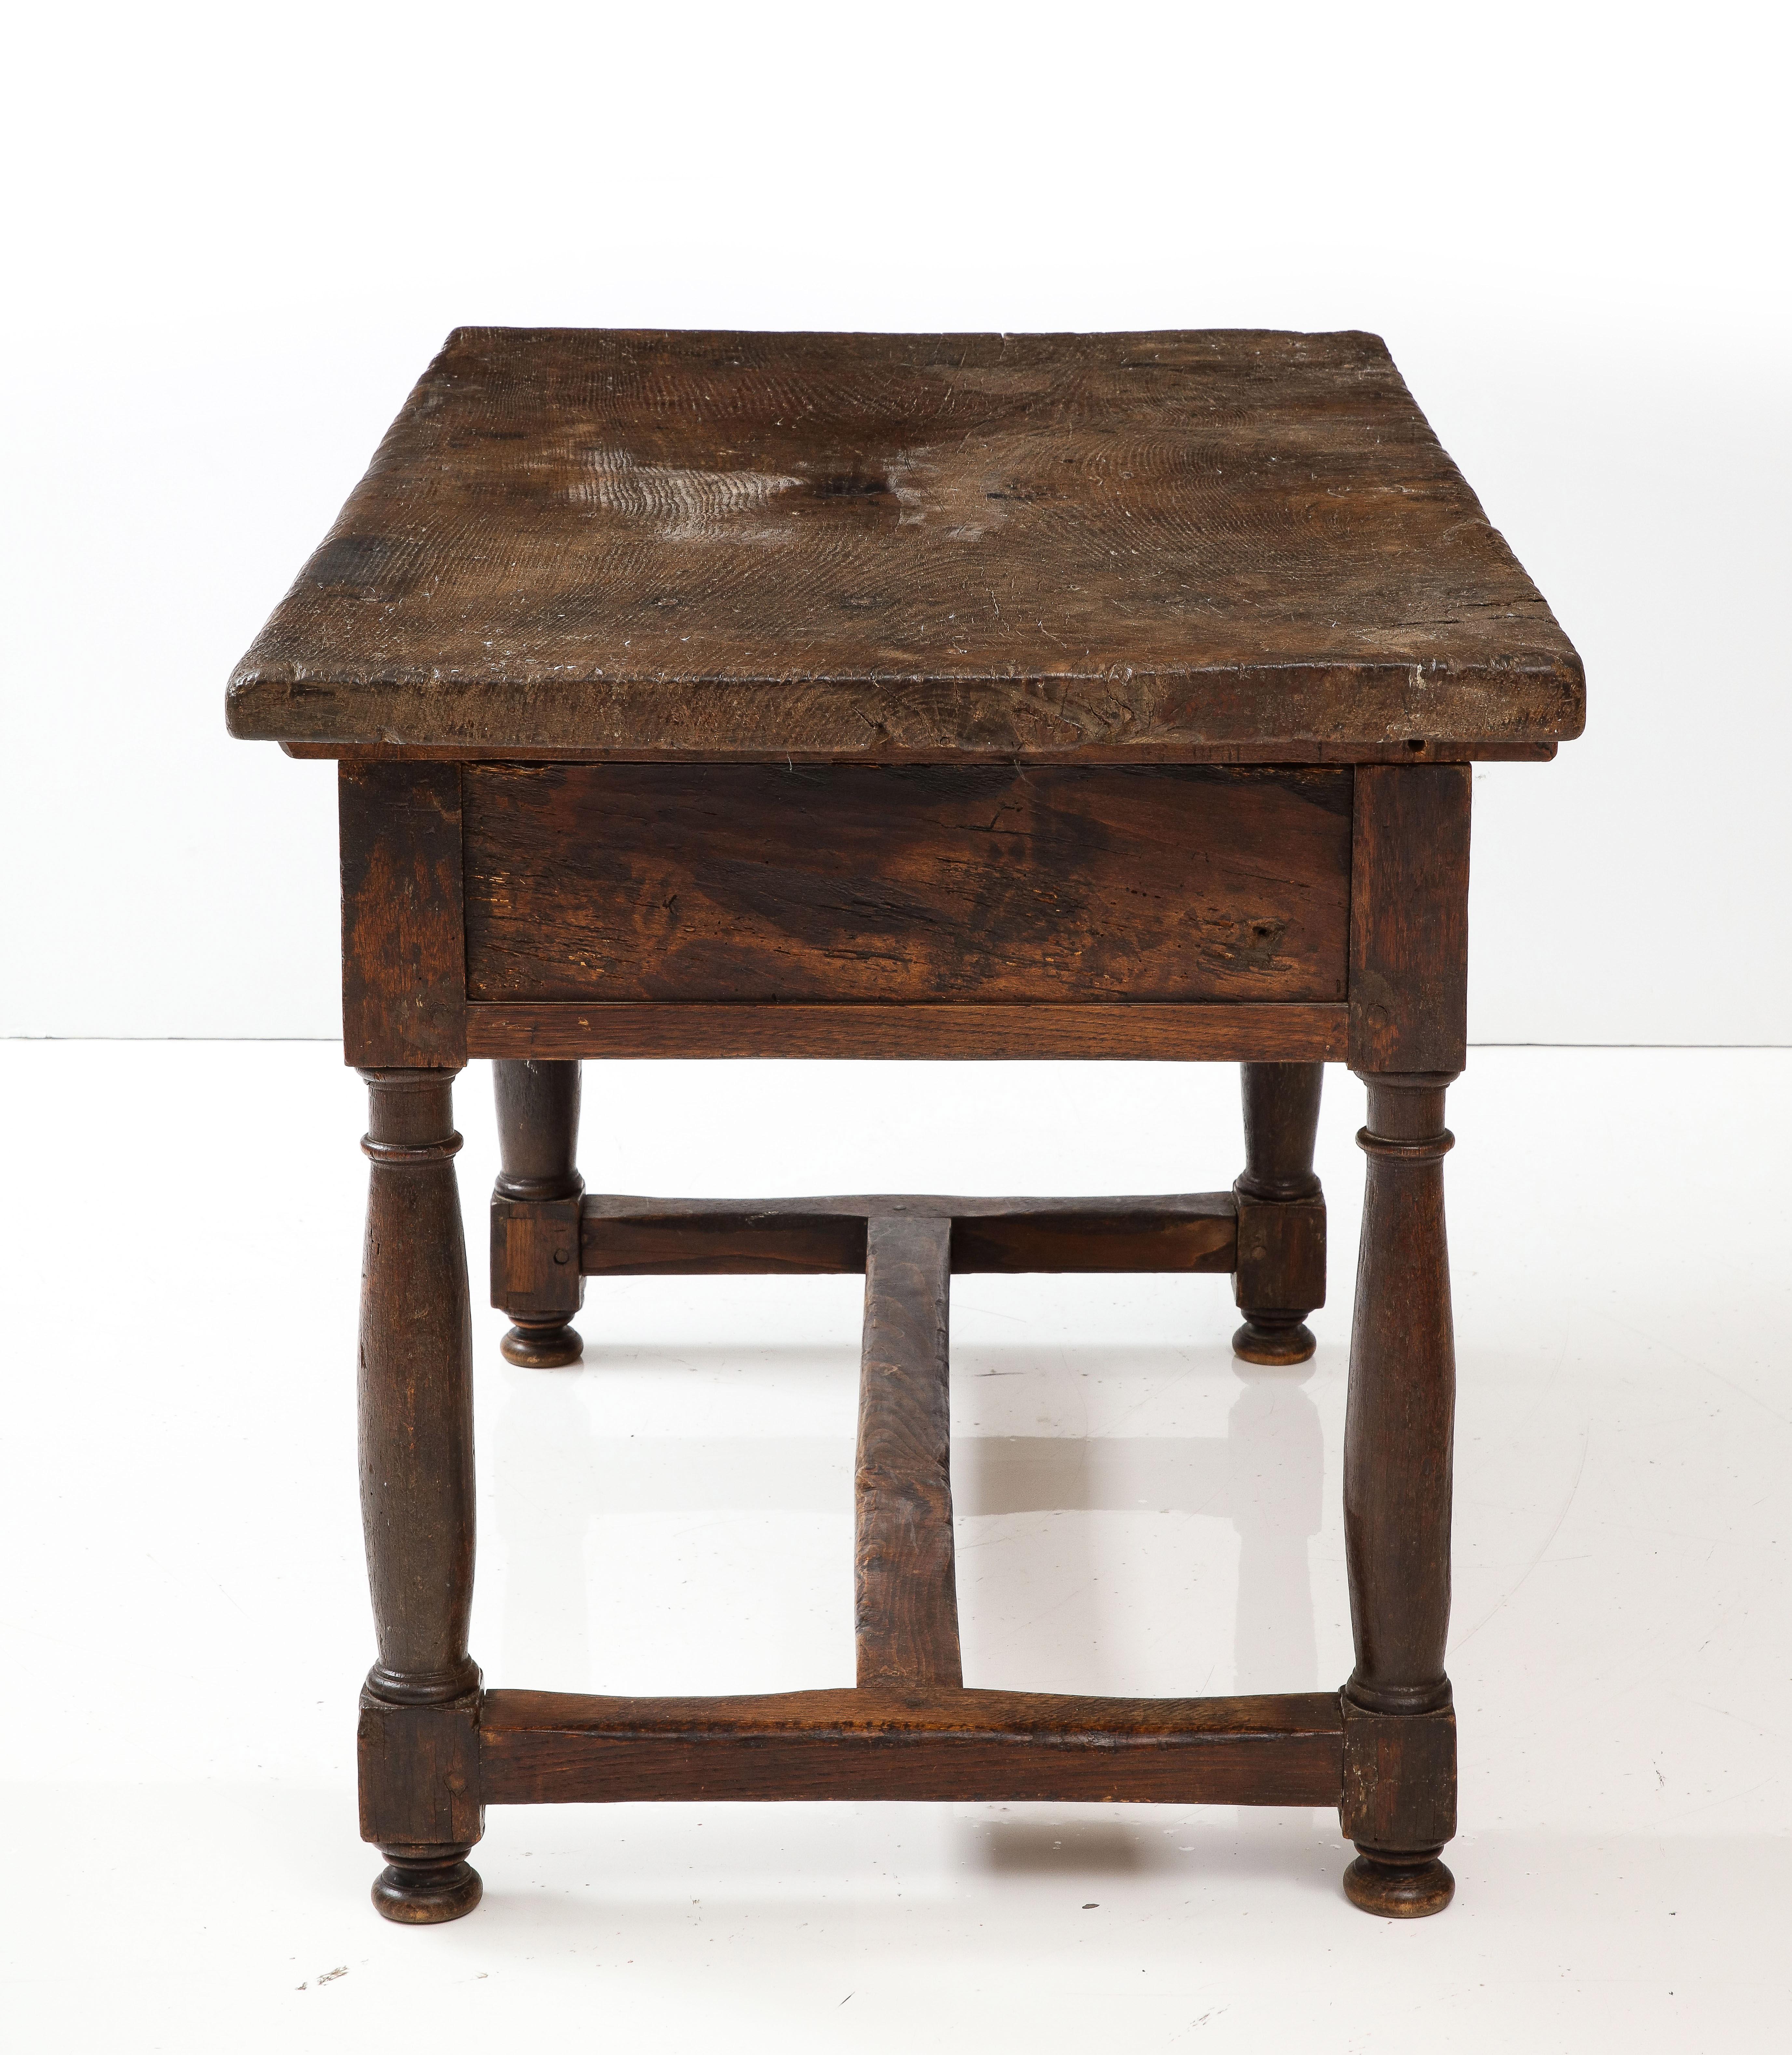 Late 16th C. Spanish Walnut Table with Iron Pulls & Drawers For Sale 9